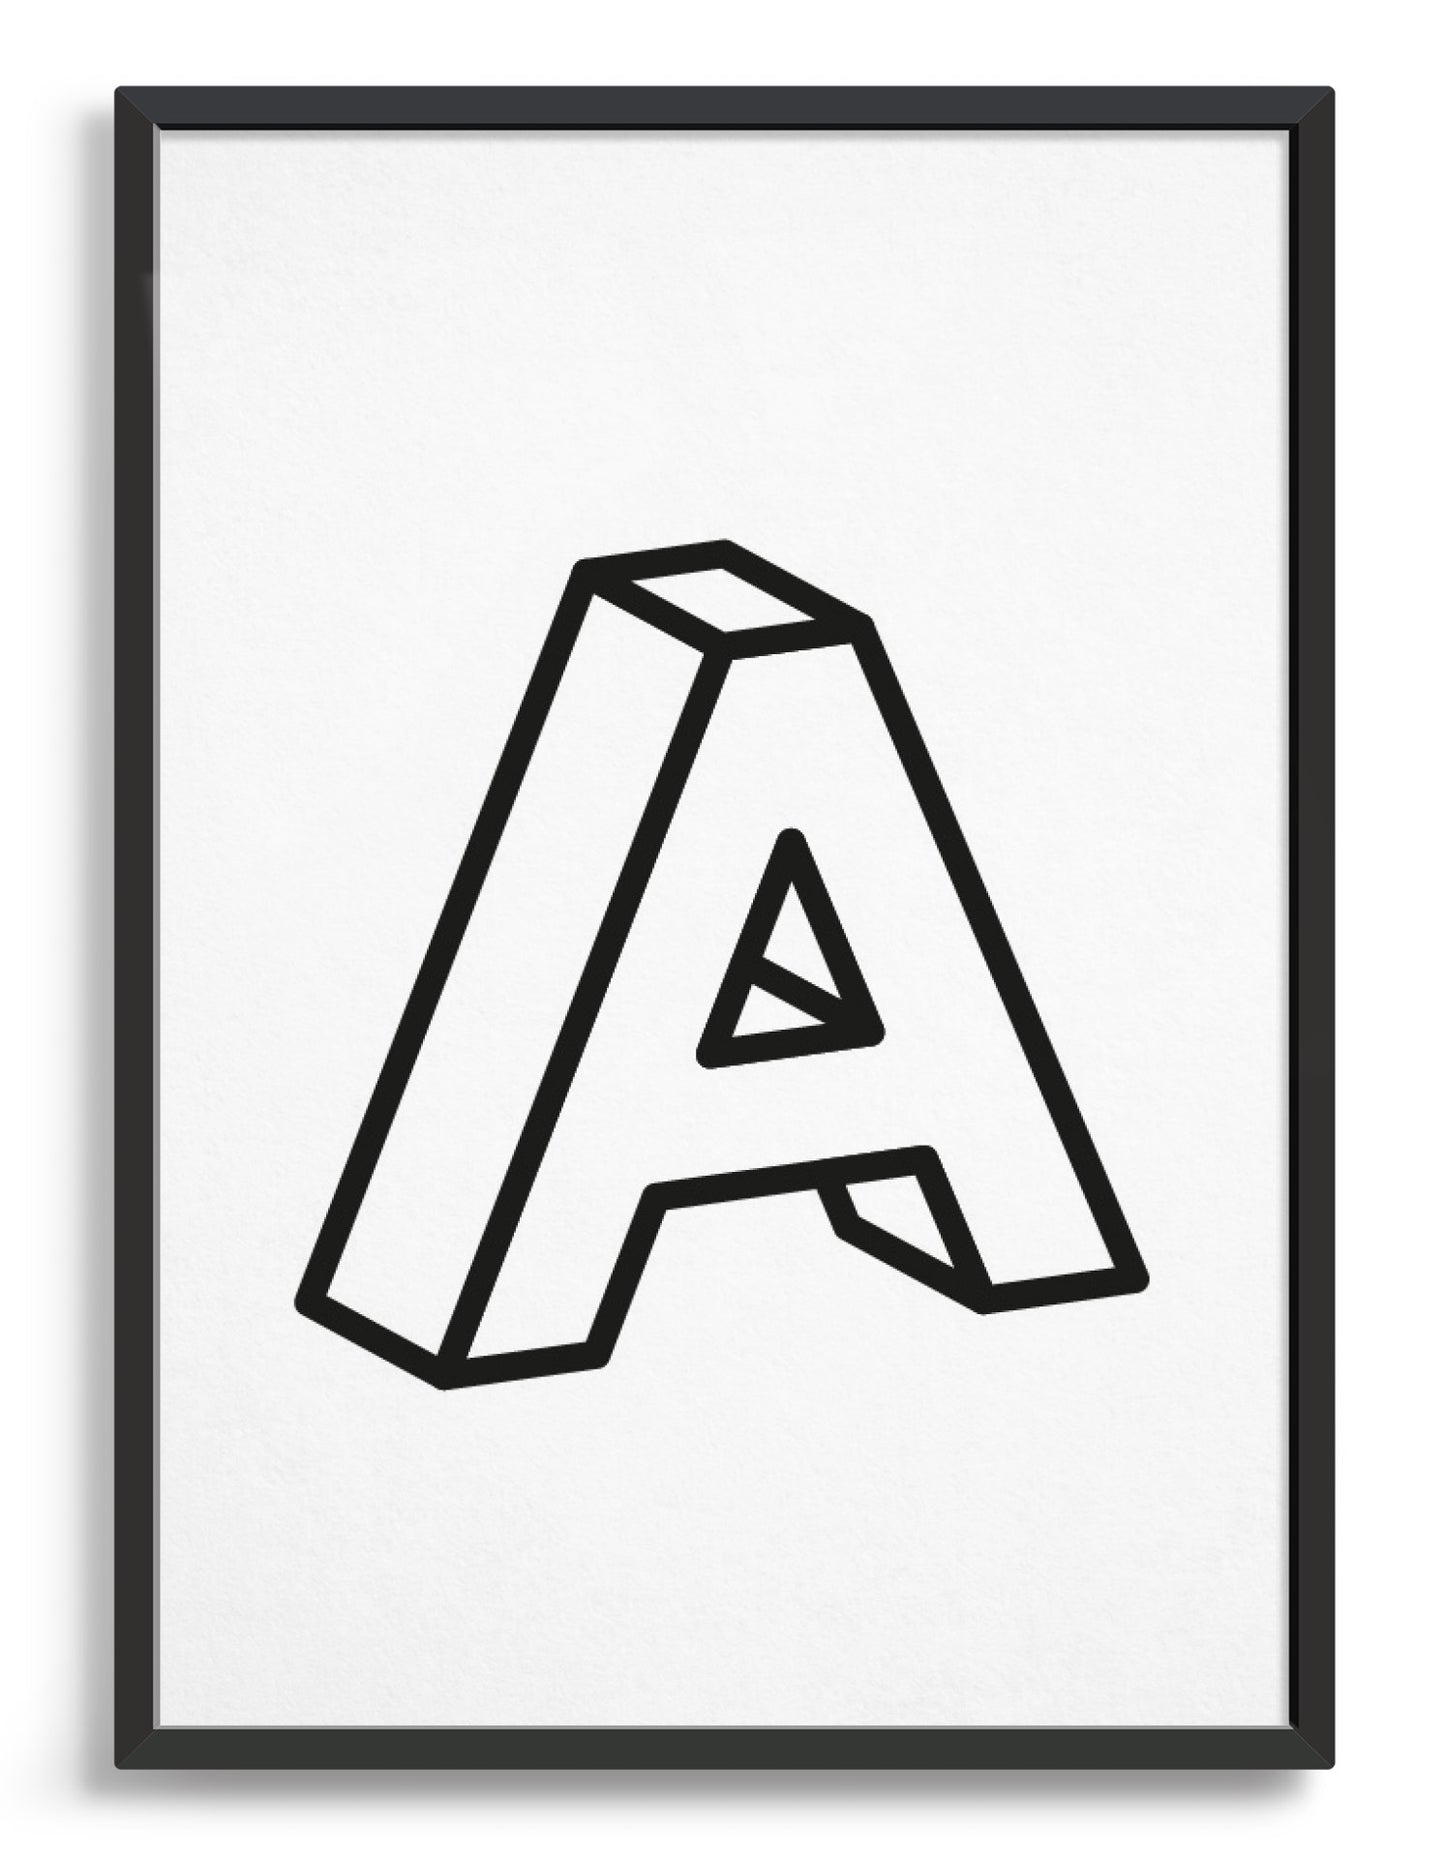 monochrome typography alphabet print depicting the letter A in 3D black type